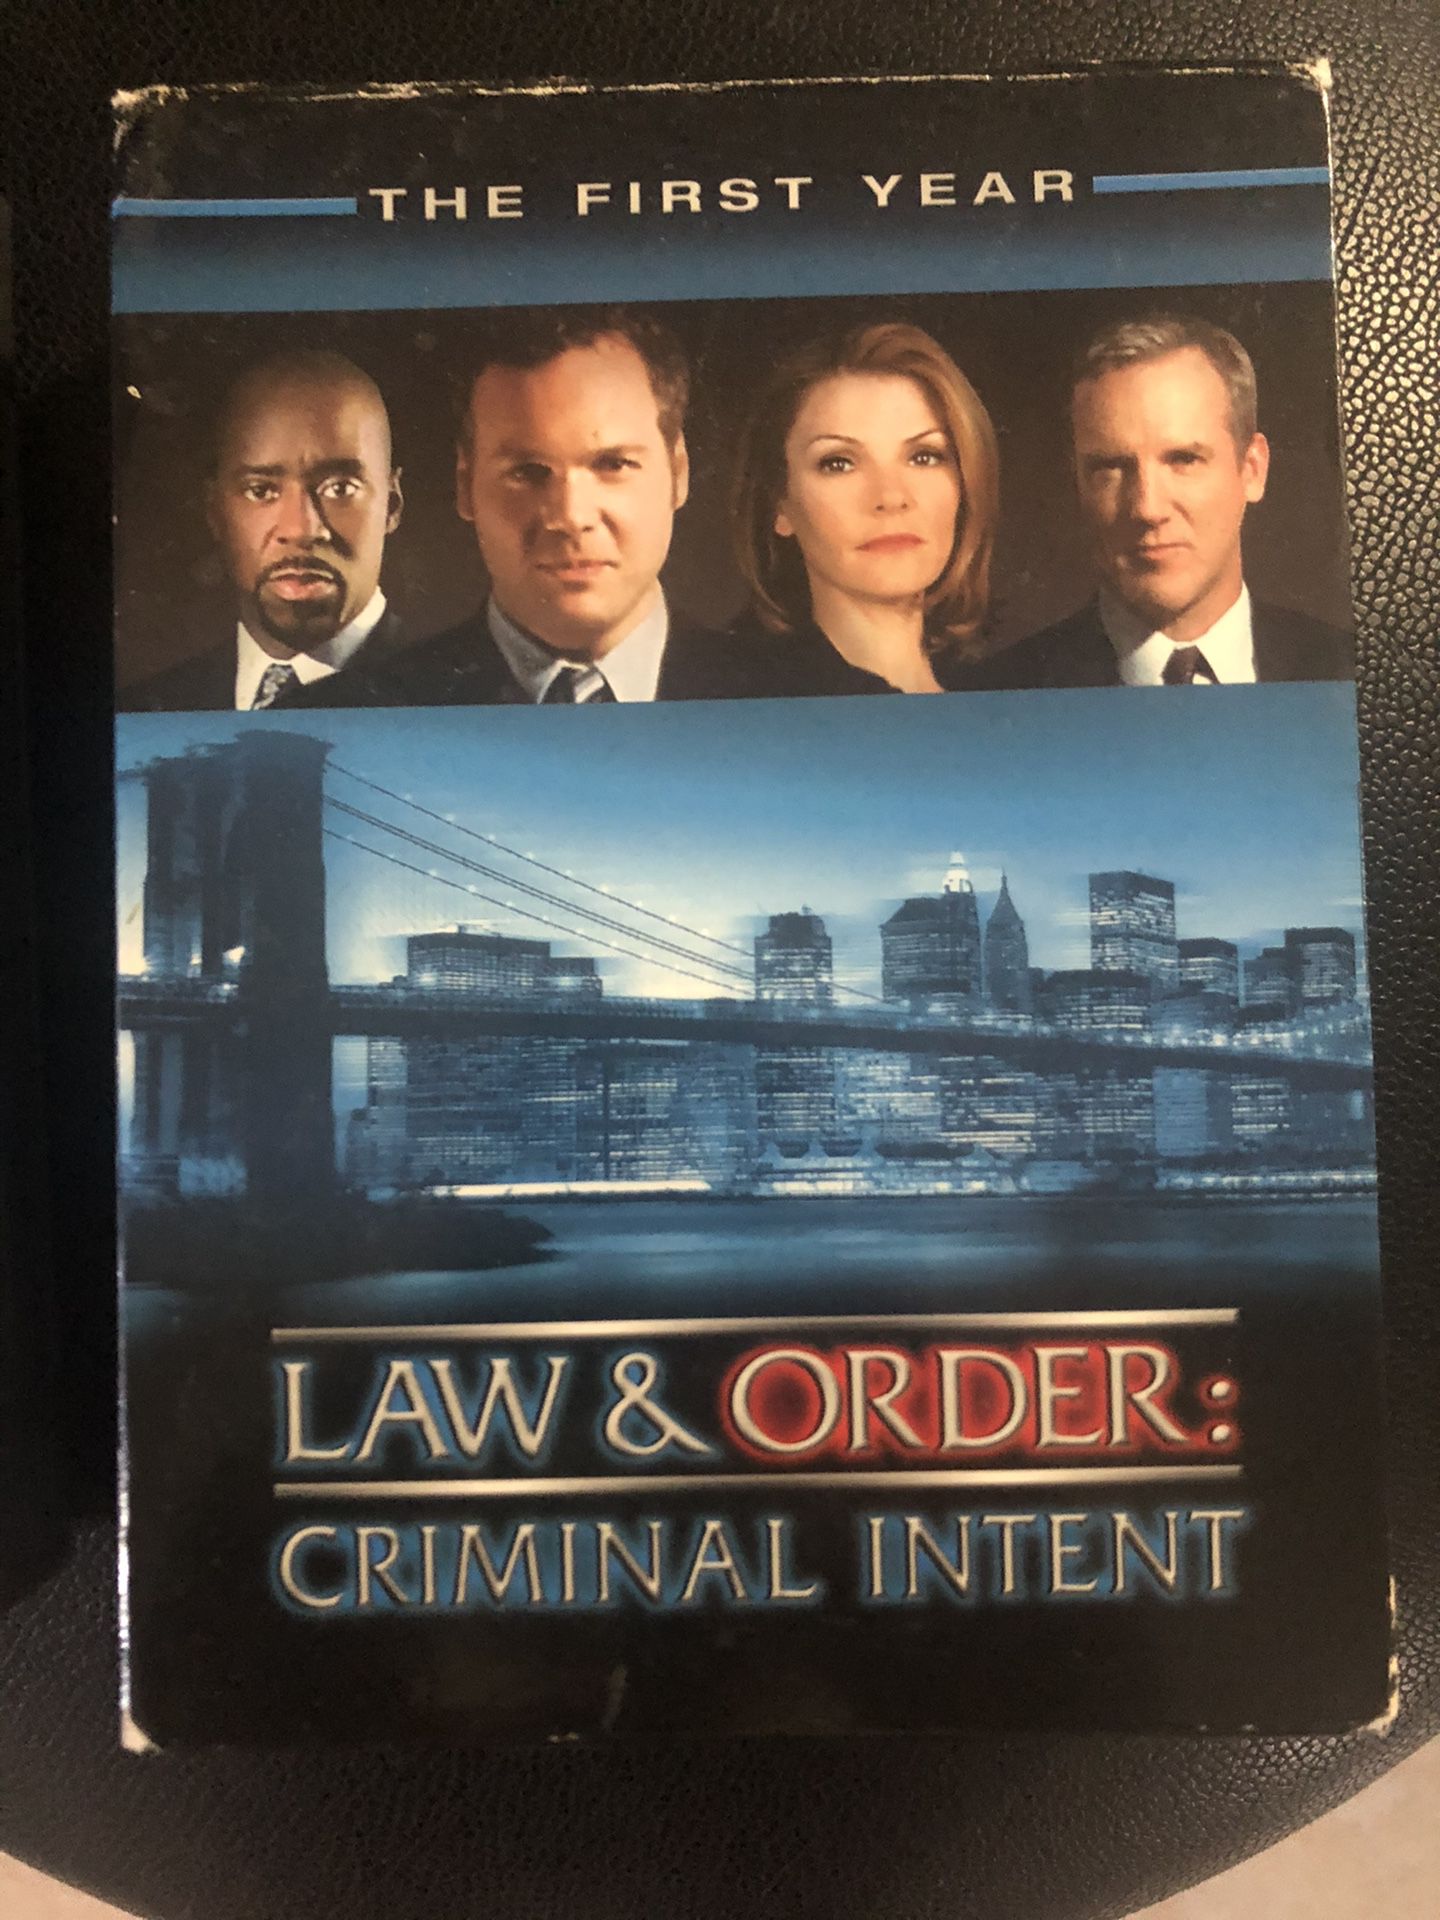 Law & order DVD 1st season collectible